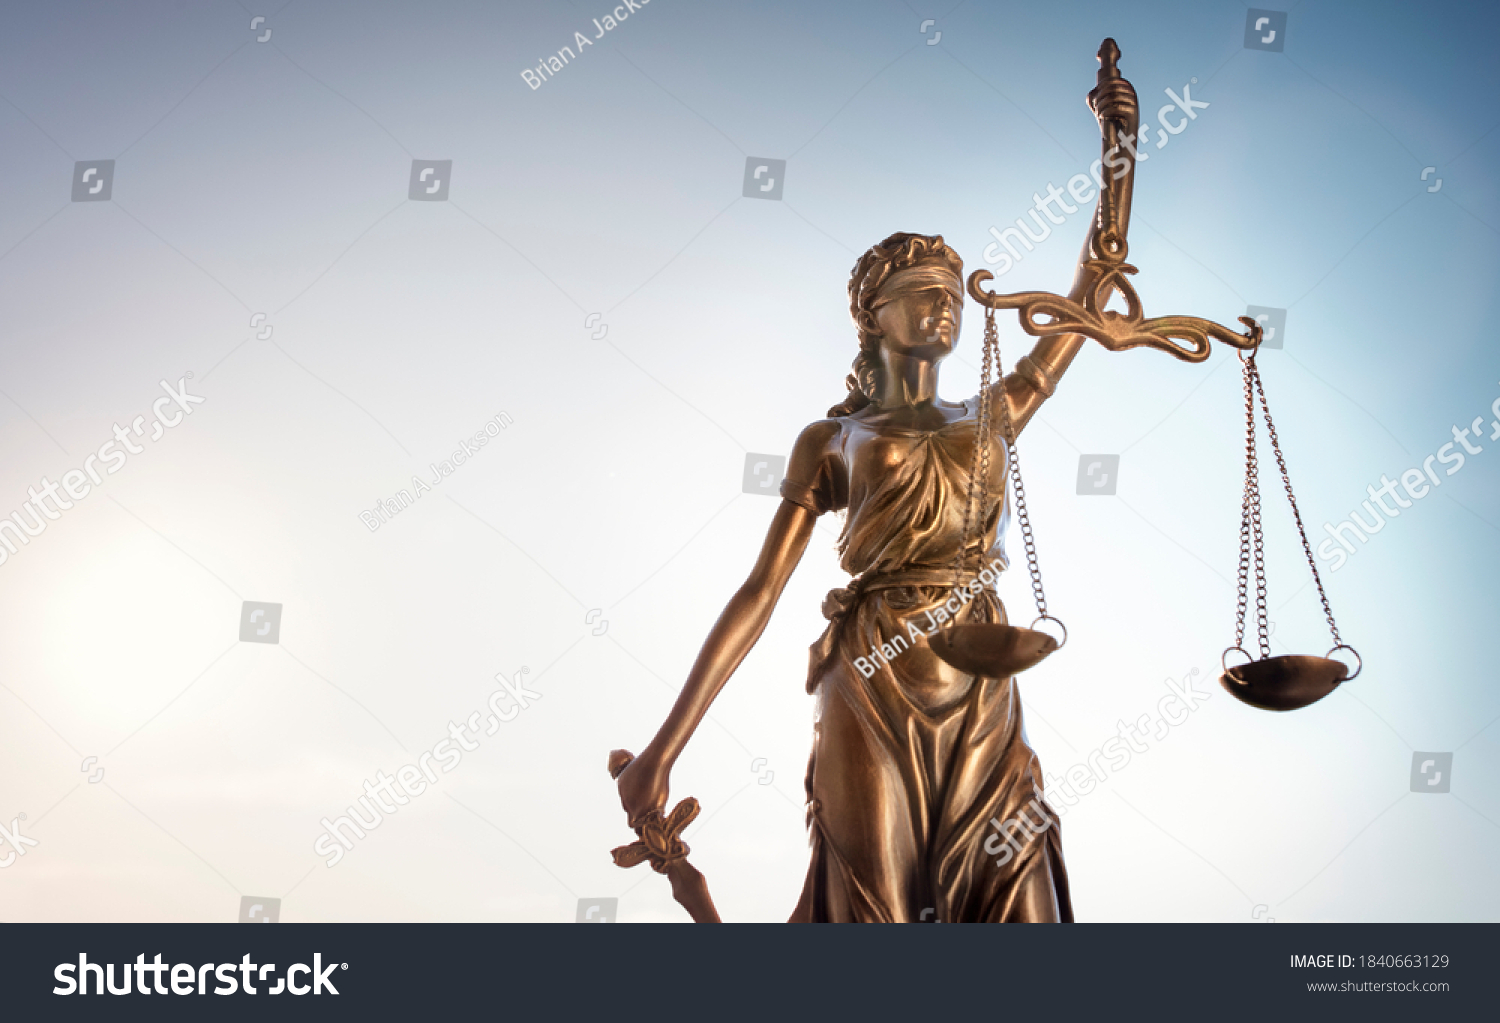 Legal and law concept statue of Lady Justice with scales of justice and sky background #1840663129